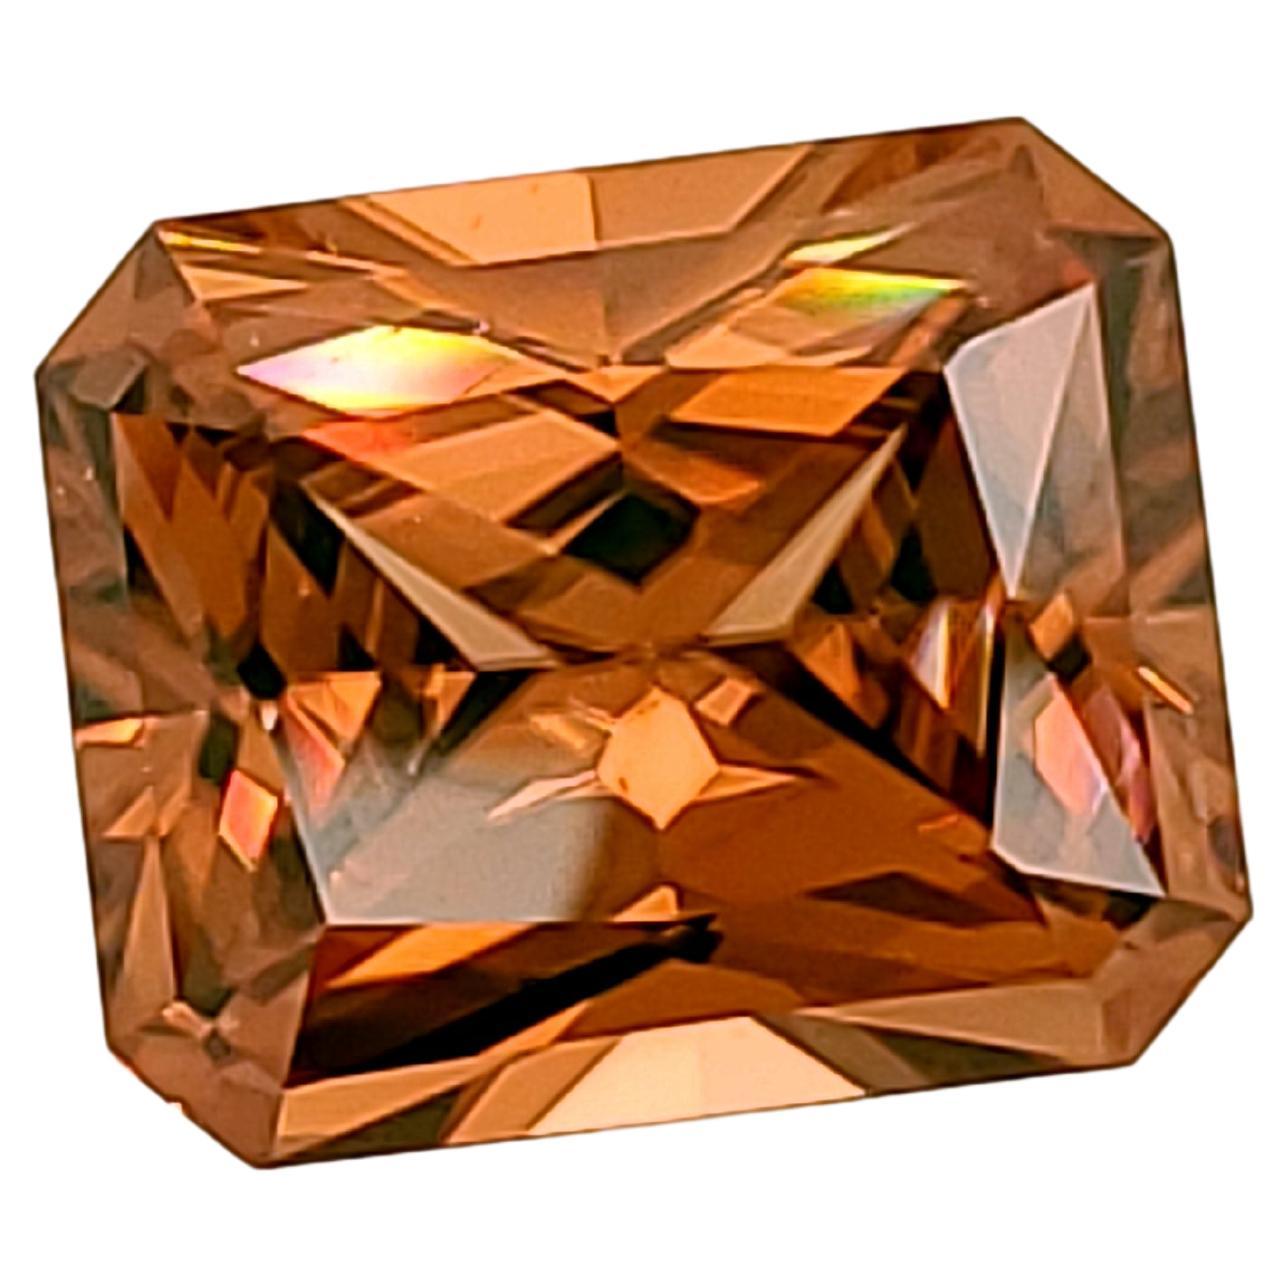 Orangy Zircon, Emerald Cut, weighing 8.71ct and Faceted in the U.S. For Sale